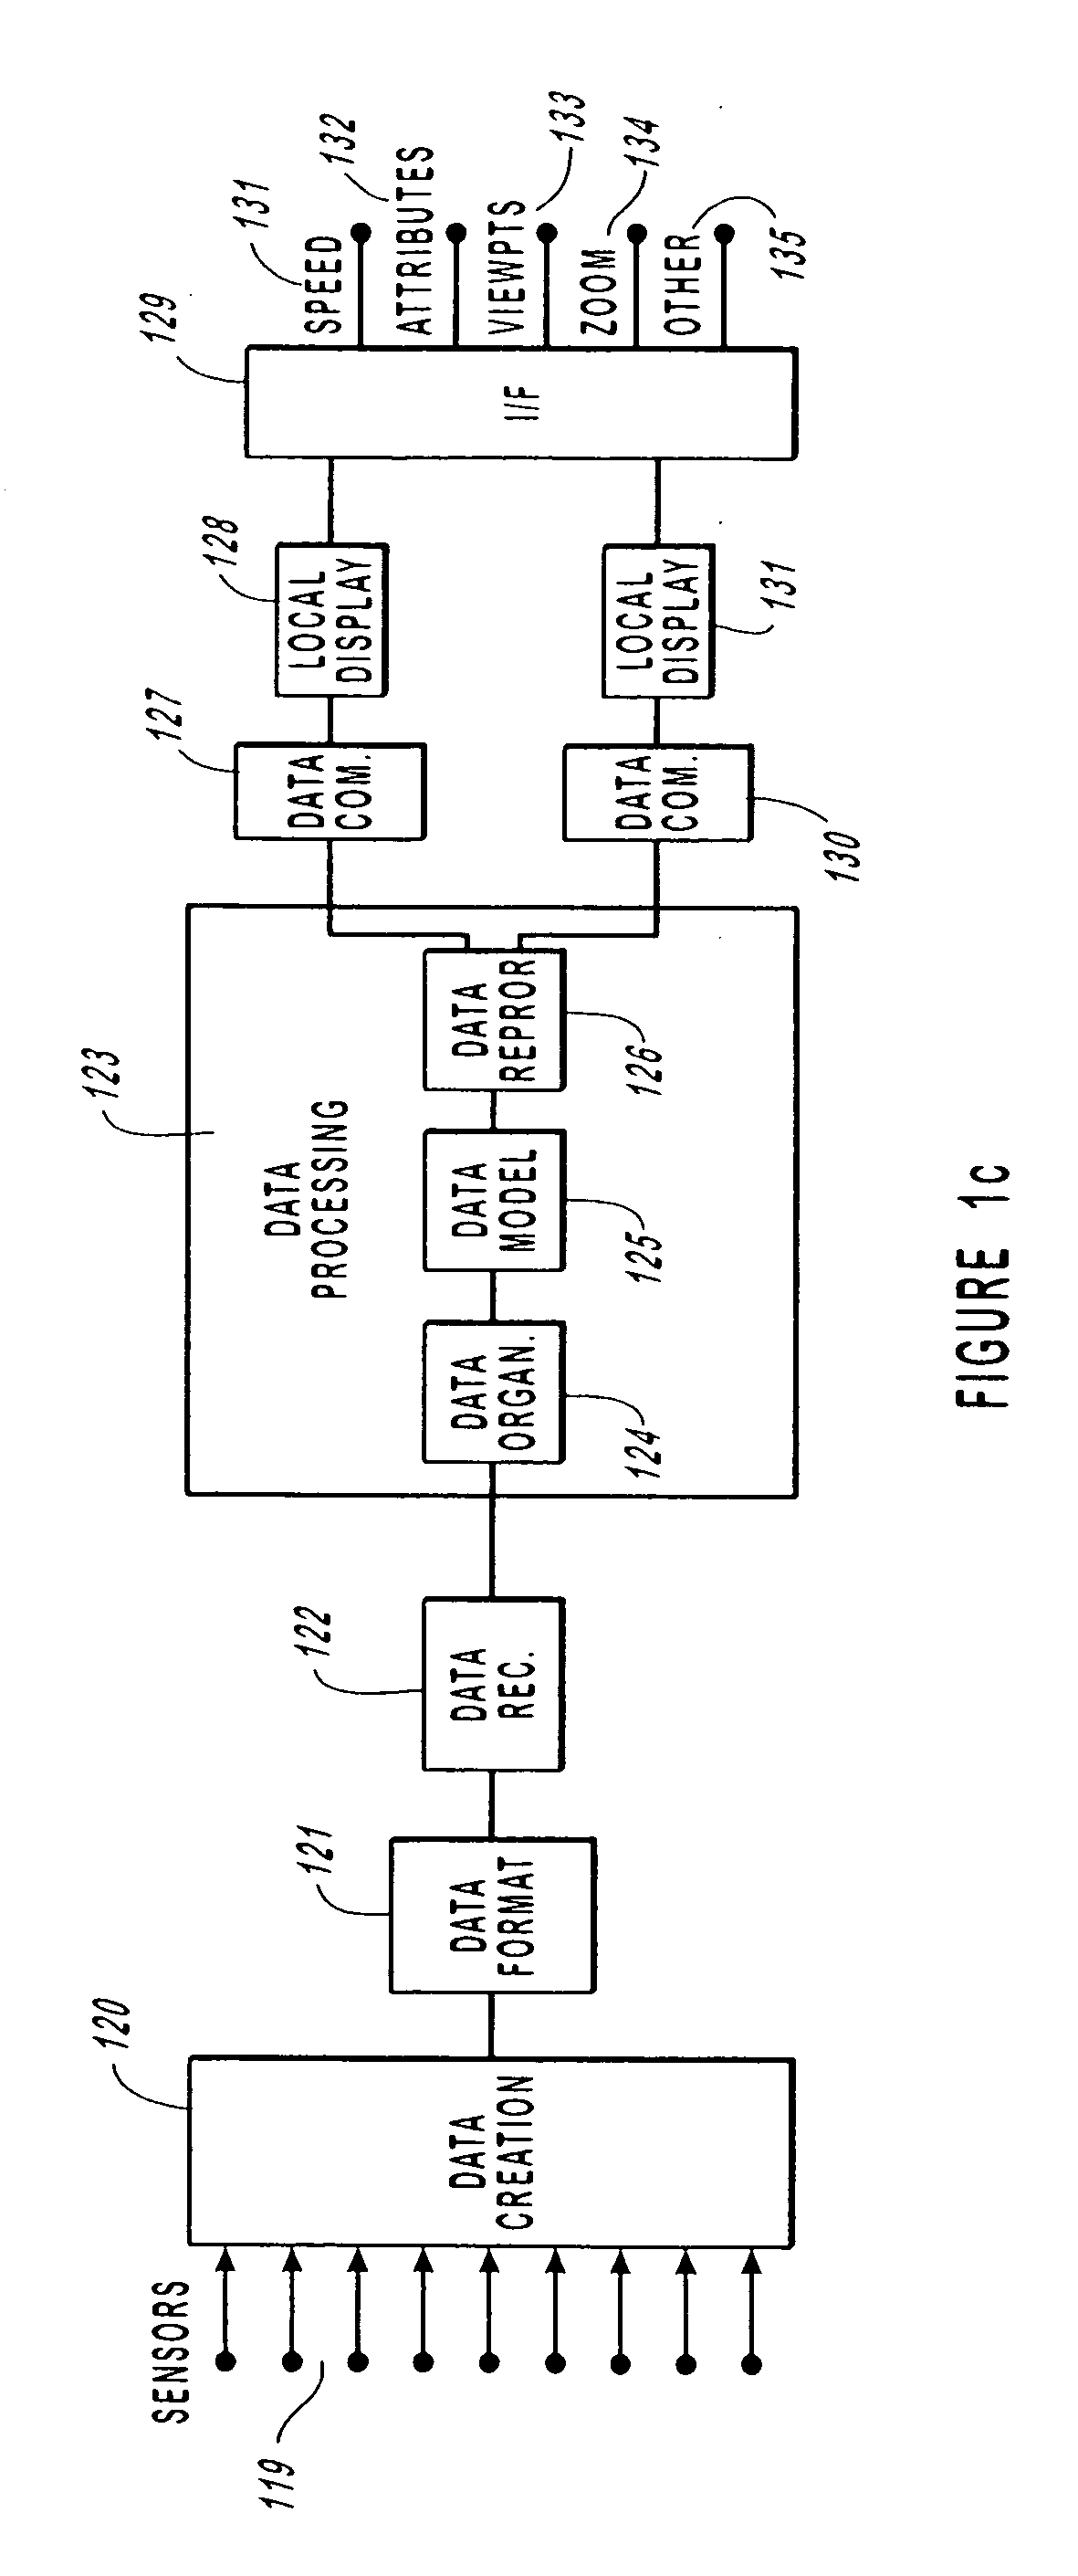 Method and apparatus for monitoring dynamic cardiovascular function using n-dimensional representations of critical functions